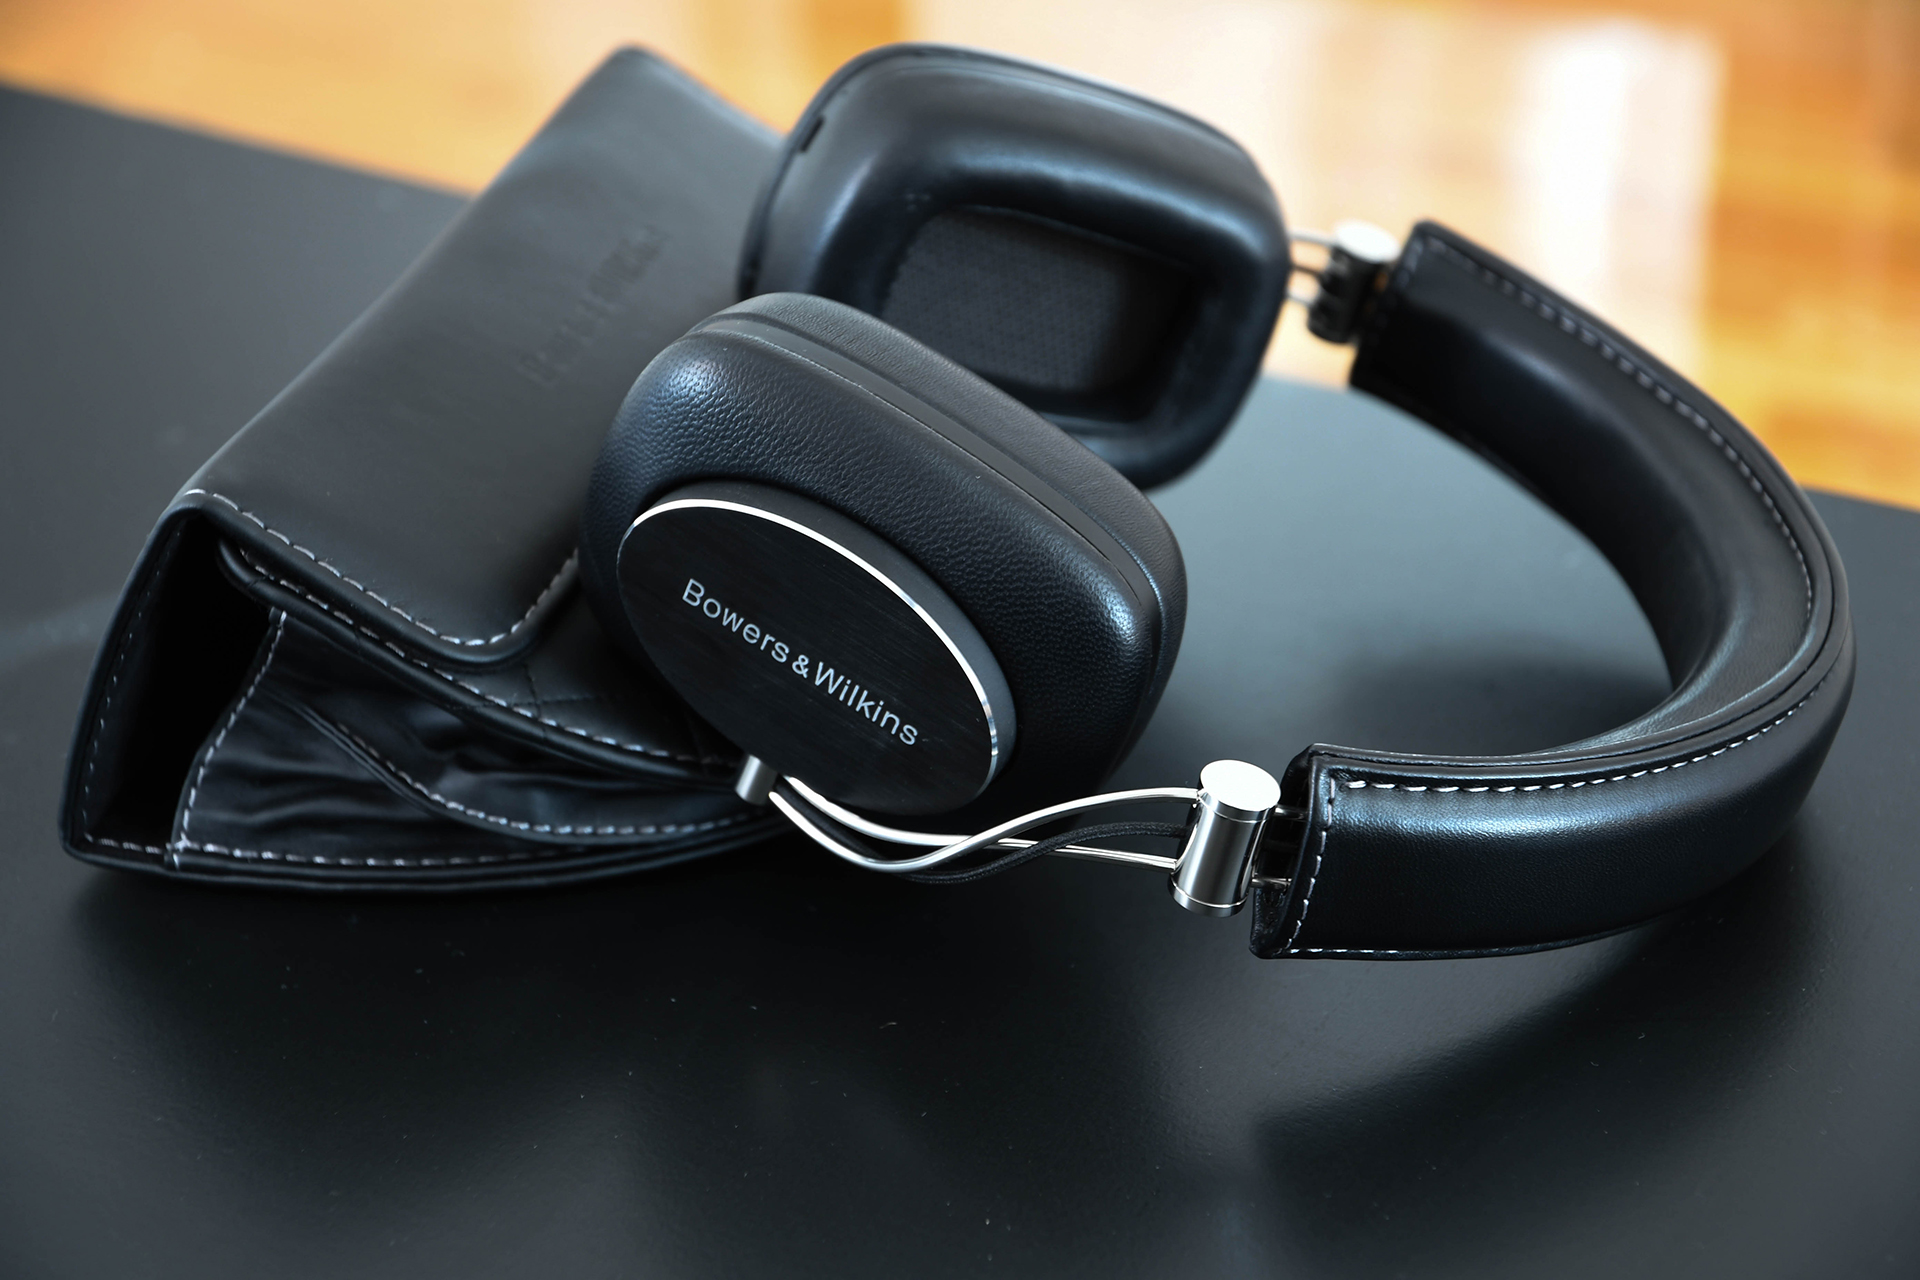 Bower & Wilkins' P7 wireless headphones are all luxe and great 